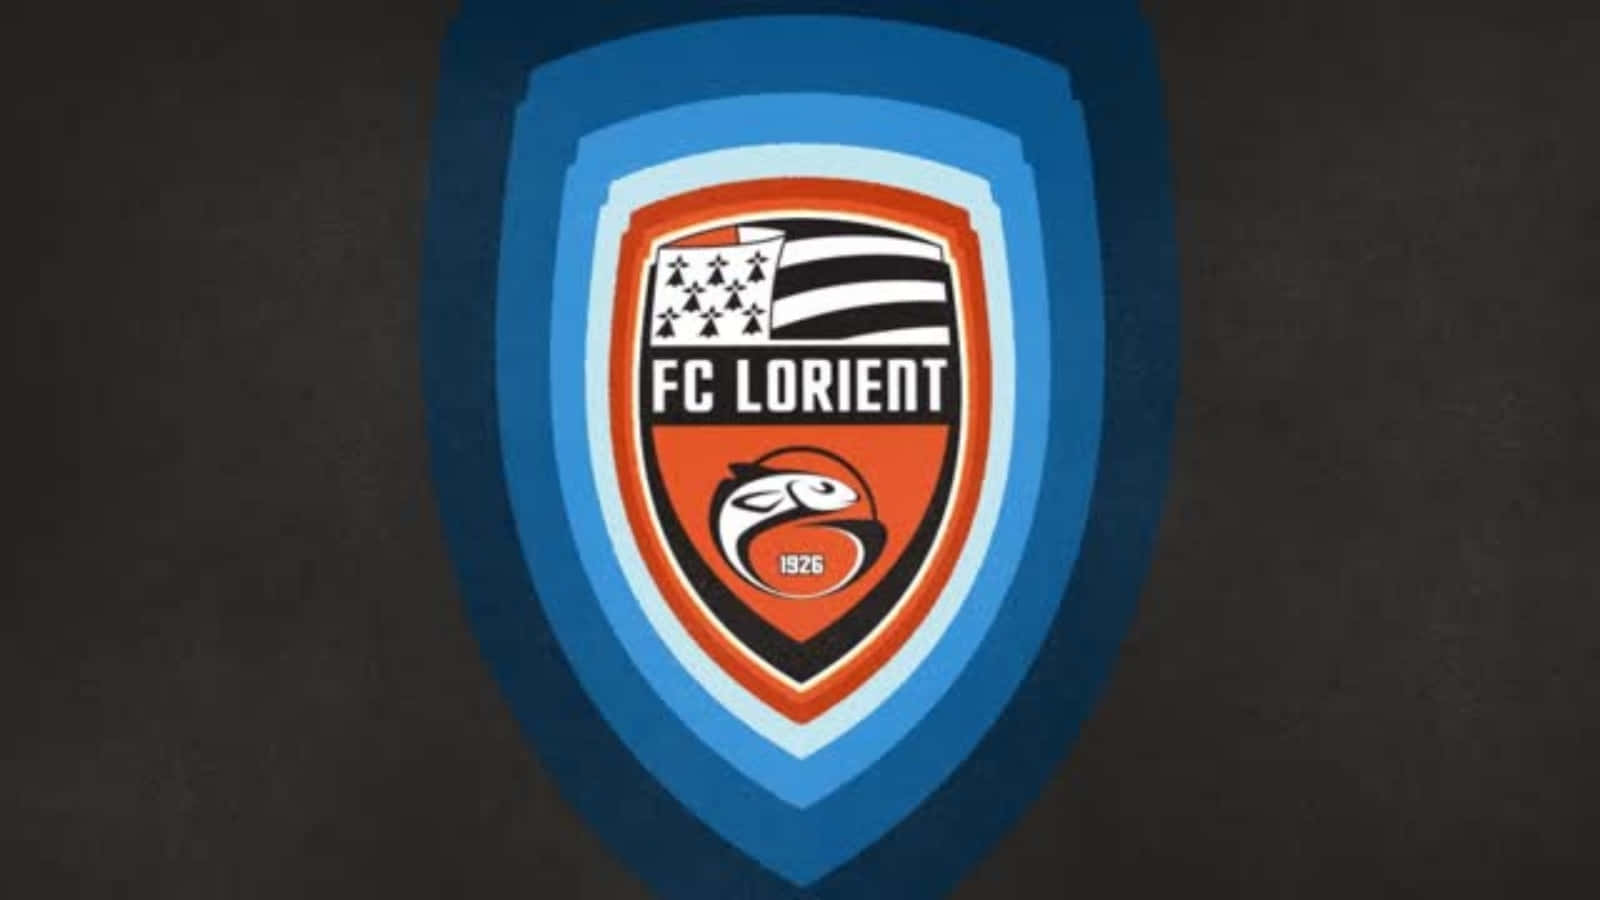 Fc Lorient Players Celebrating Victory On The Field Wallpaper